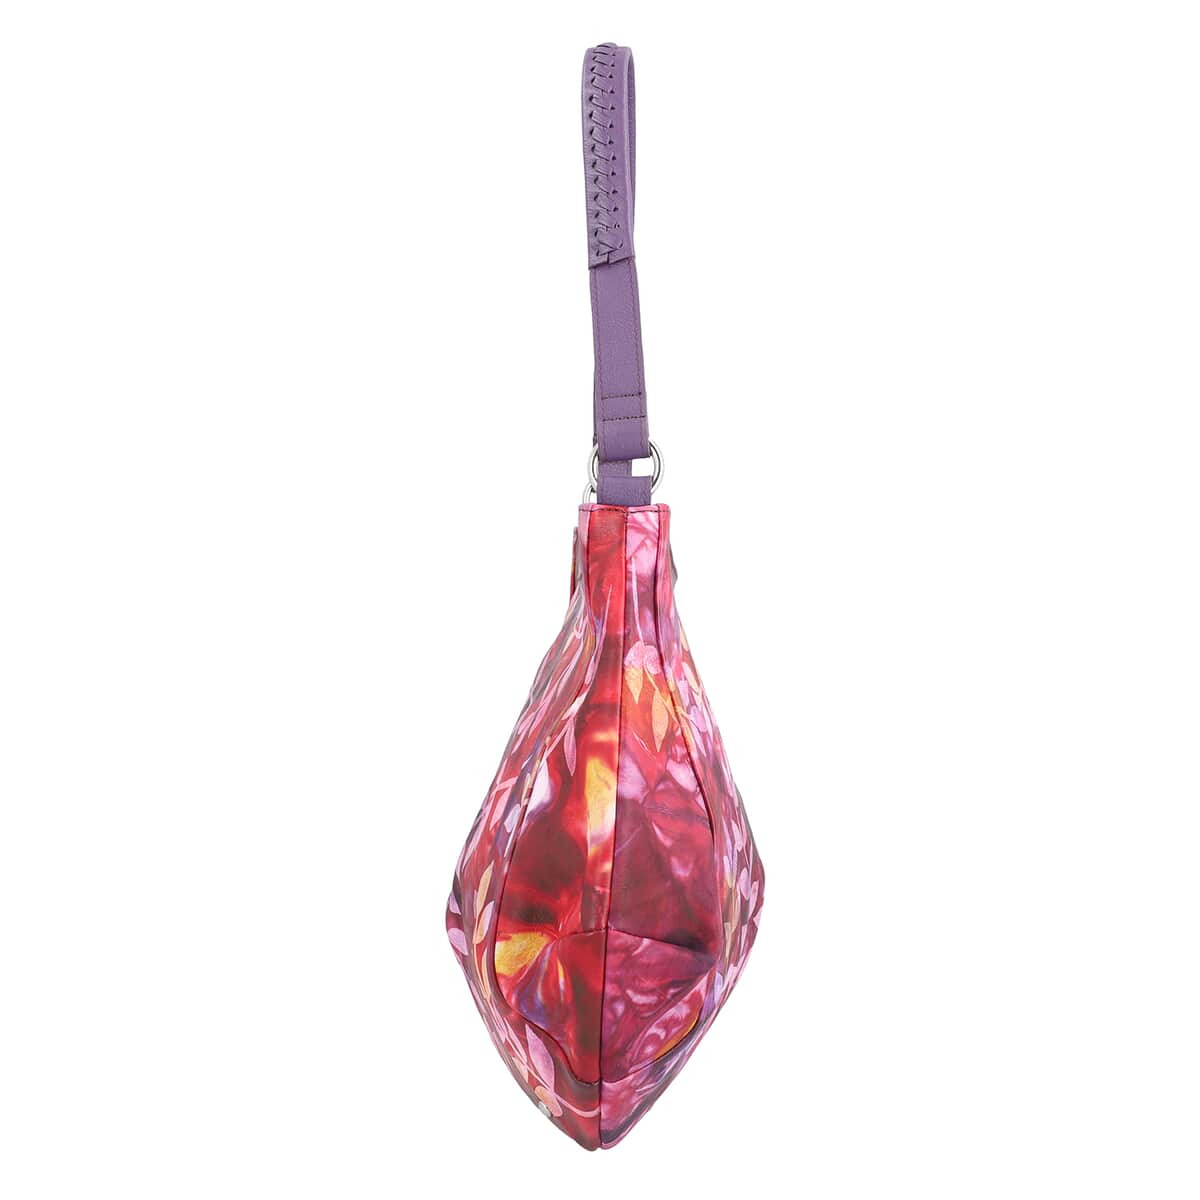 "SUKRITI 100% Genuine Leather Hobo Bag Theme: Tie Dye Color: Purple Size: 14.56 x 7.6 x 9 inches" image number 3